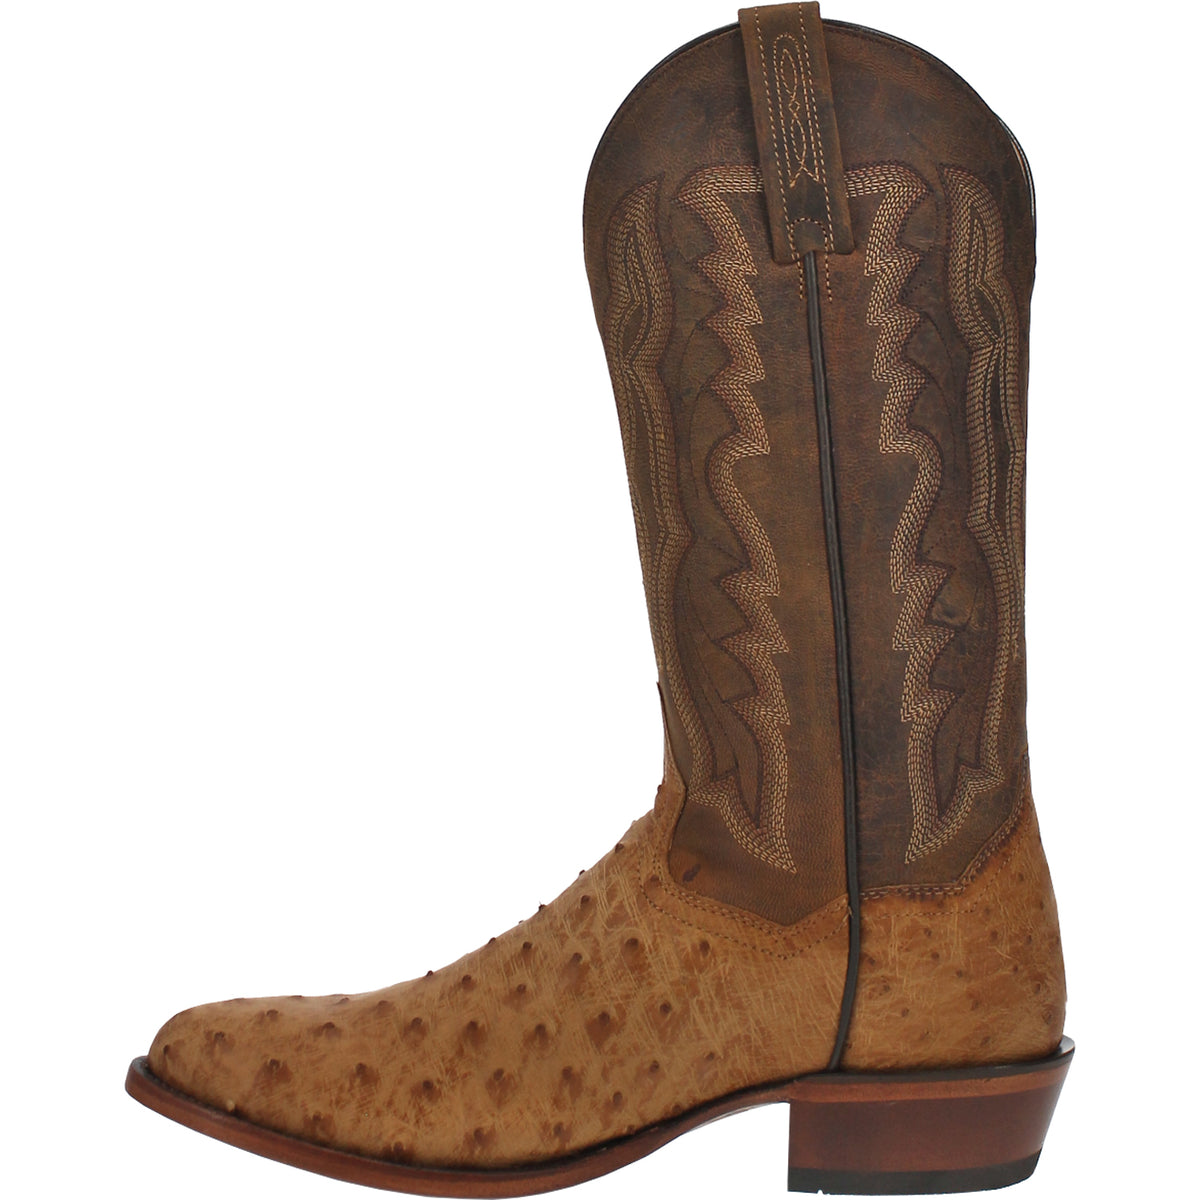 GEHRIG FULL QUILL OSTRICH BOOT Cover